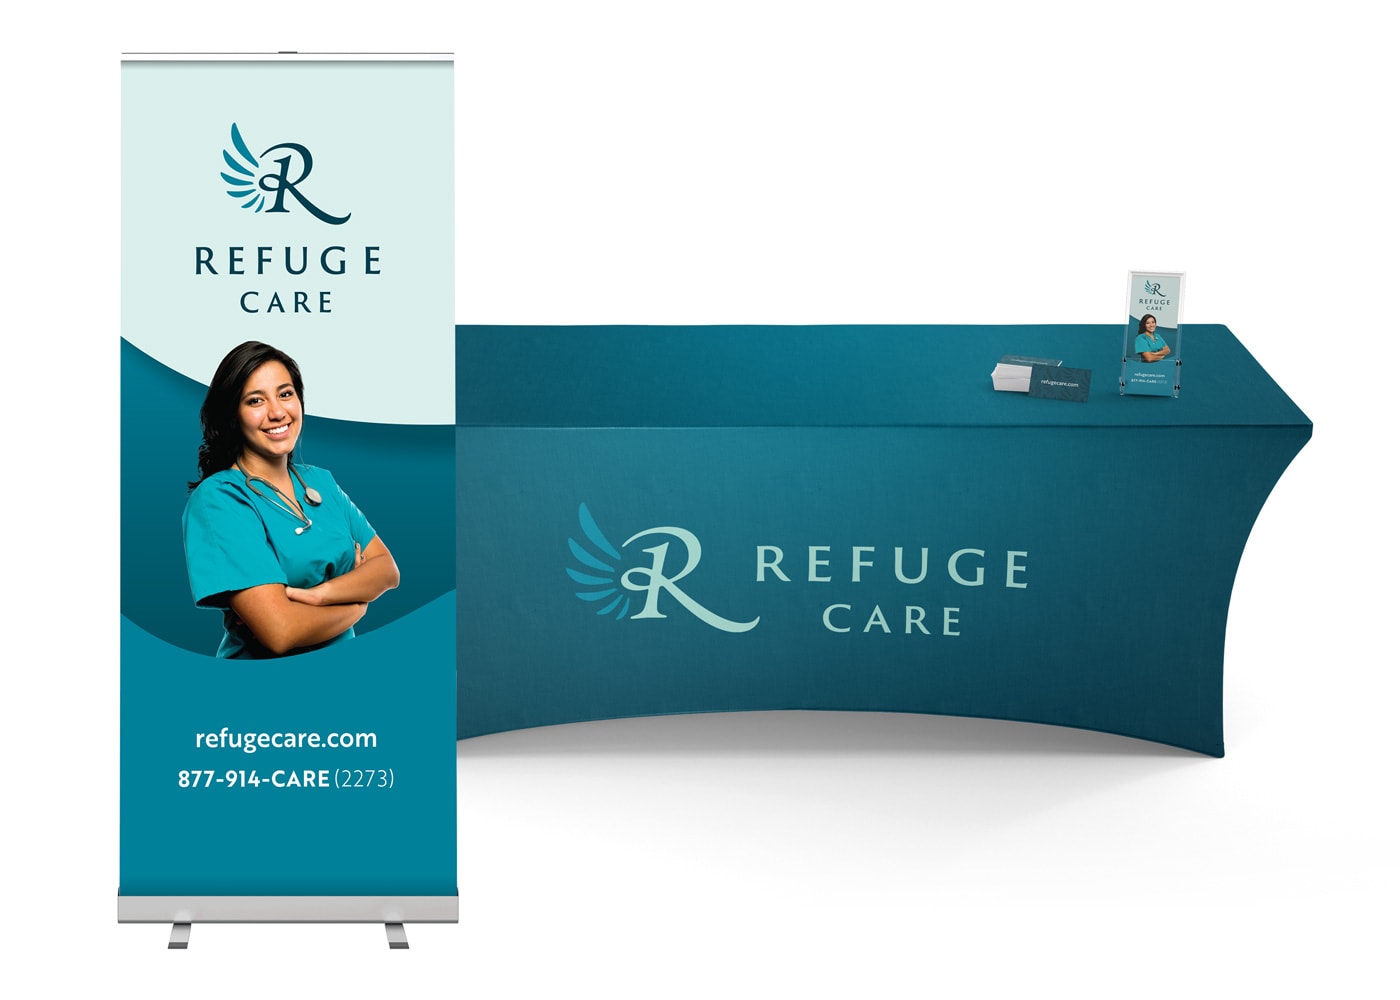 Retractable banner and table cloth branding for Refuge Care